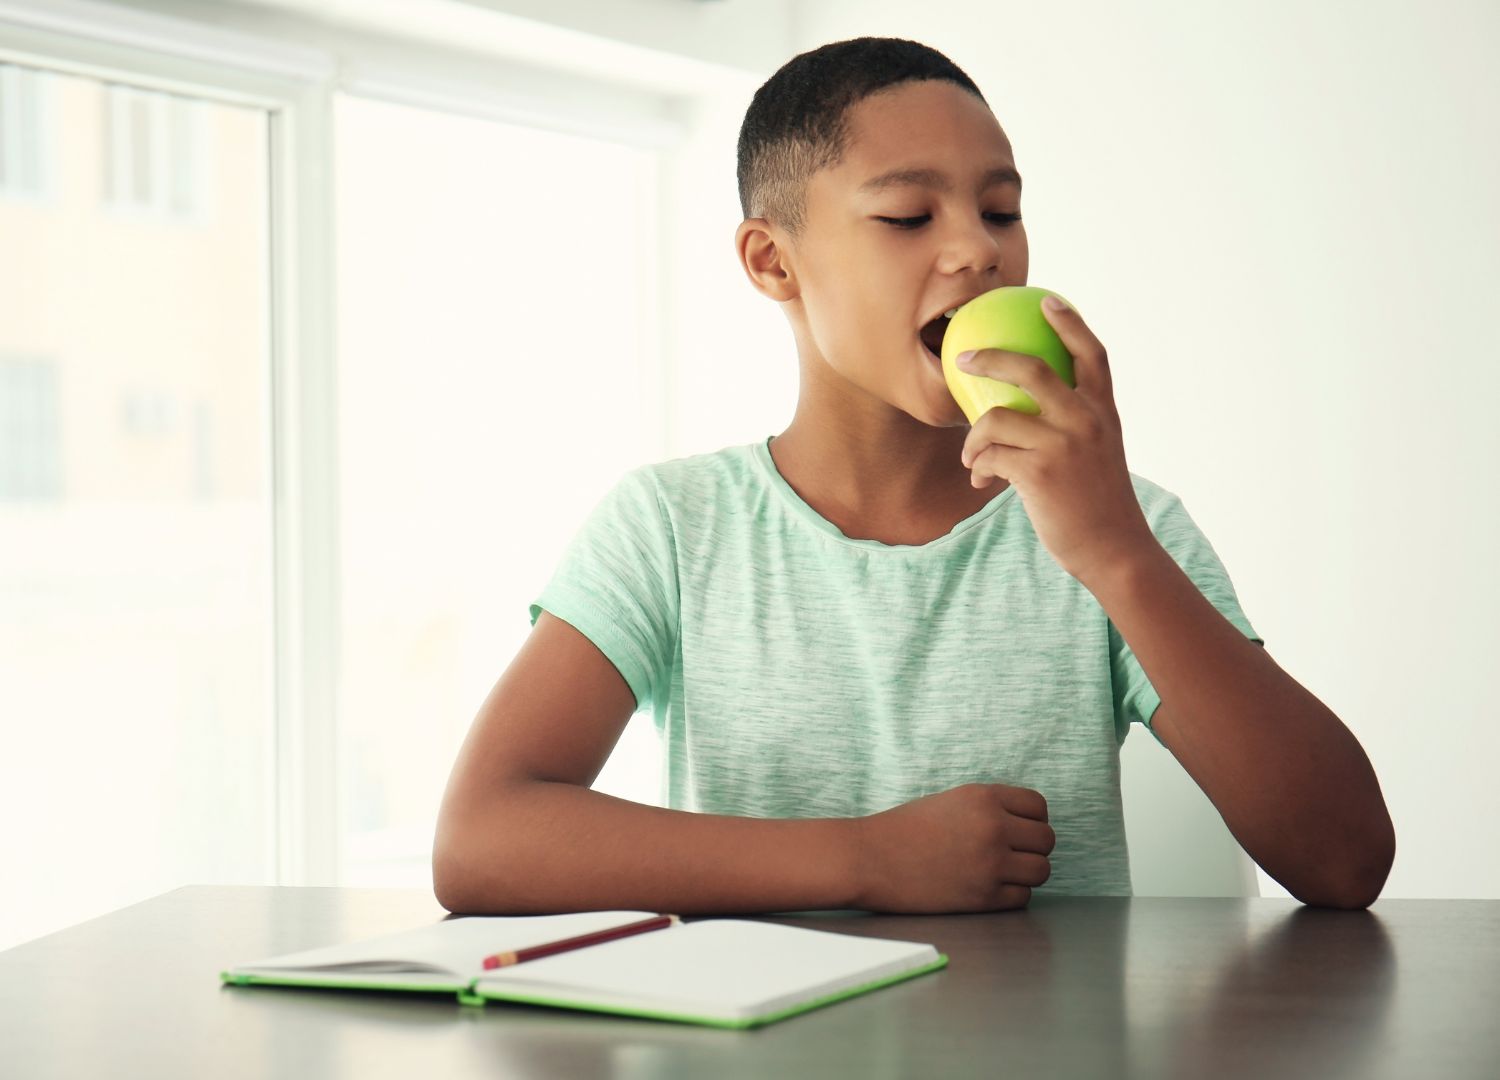 CHILDHOOD NUTRITION: WHAT CHILDREN NEED TO GROW HEALTHY